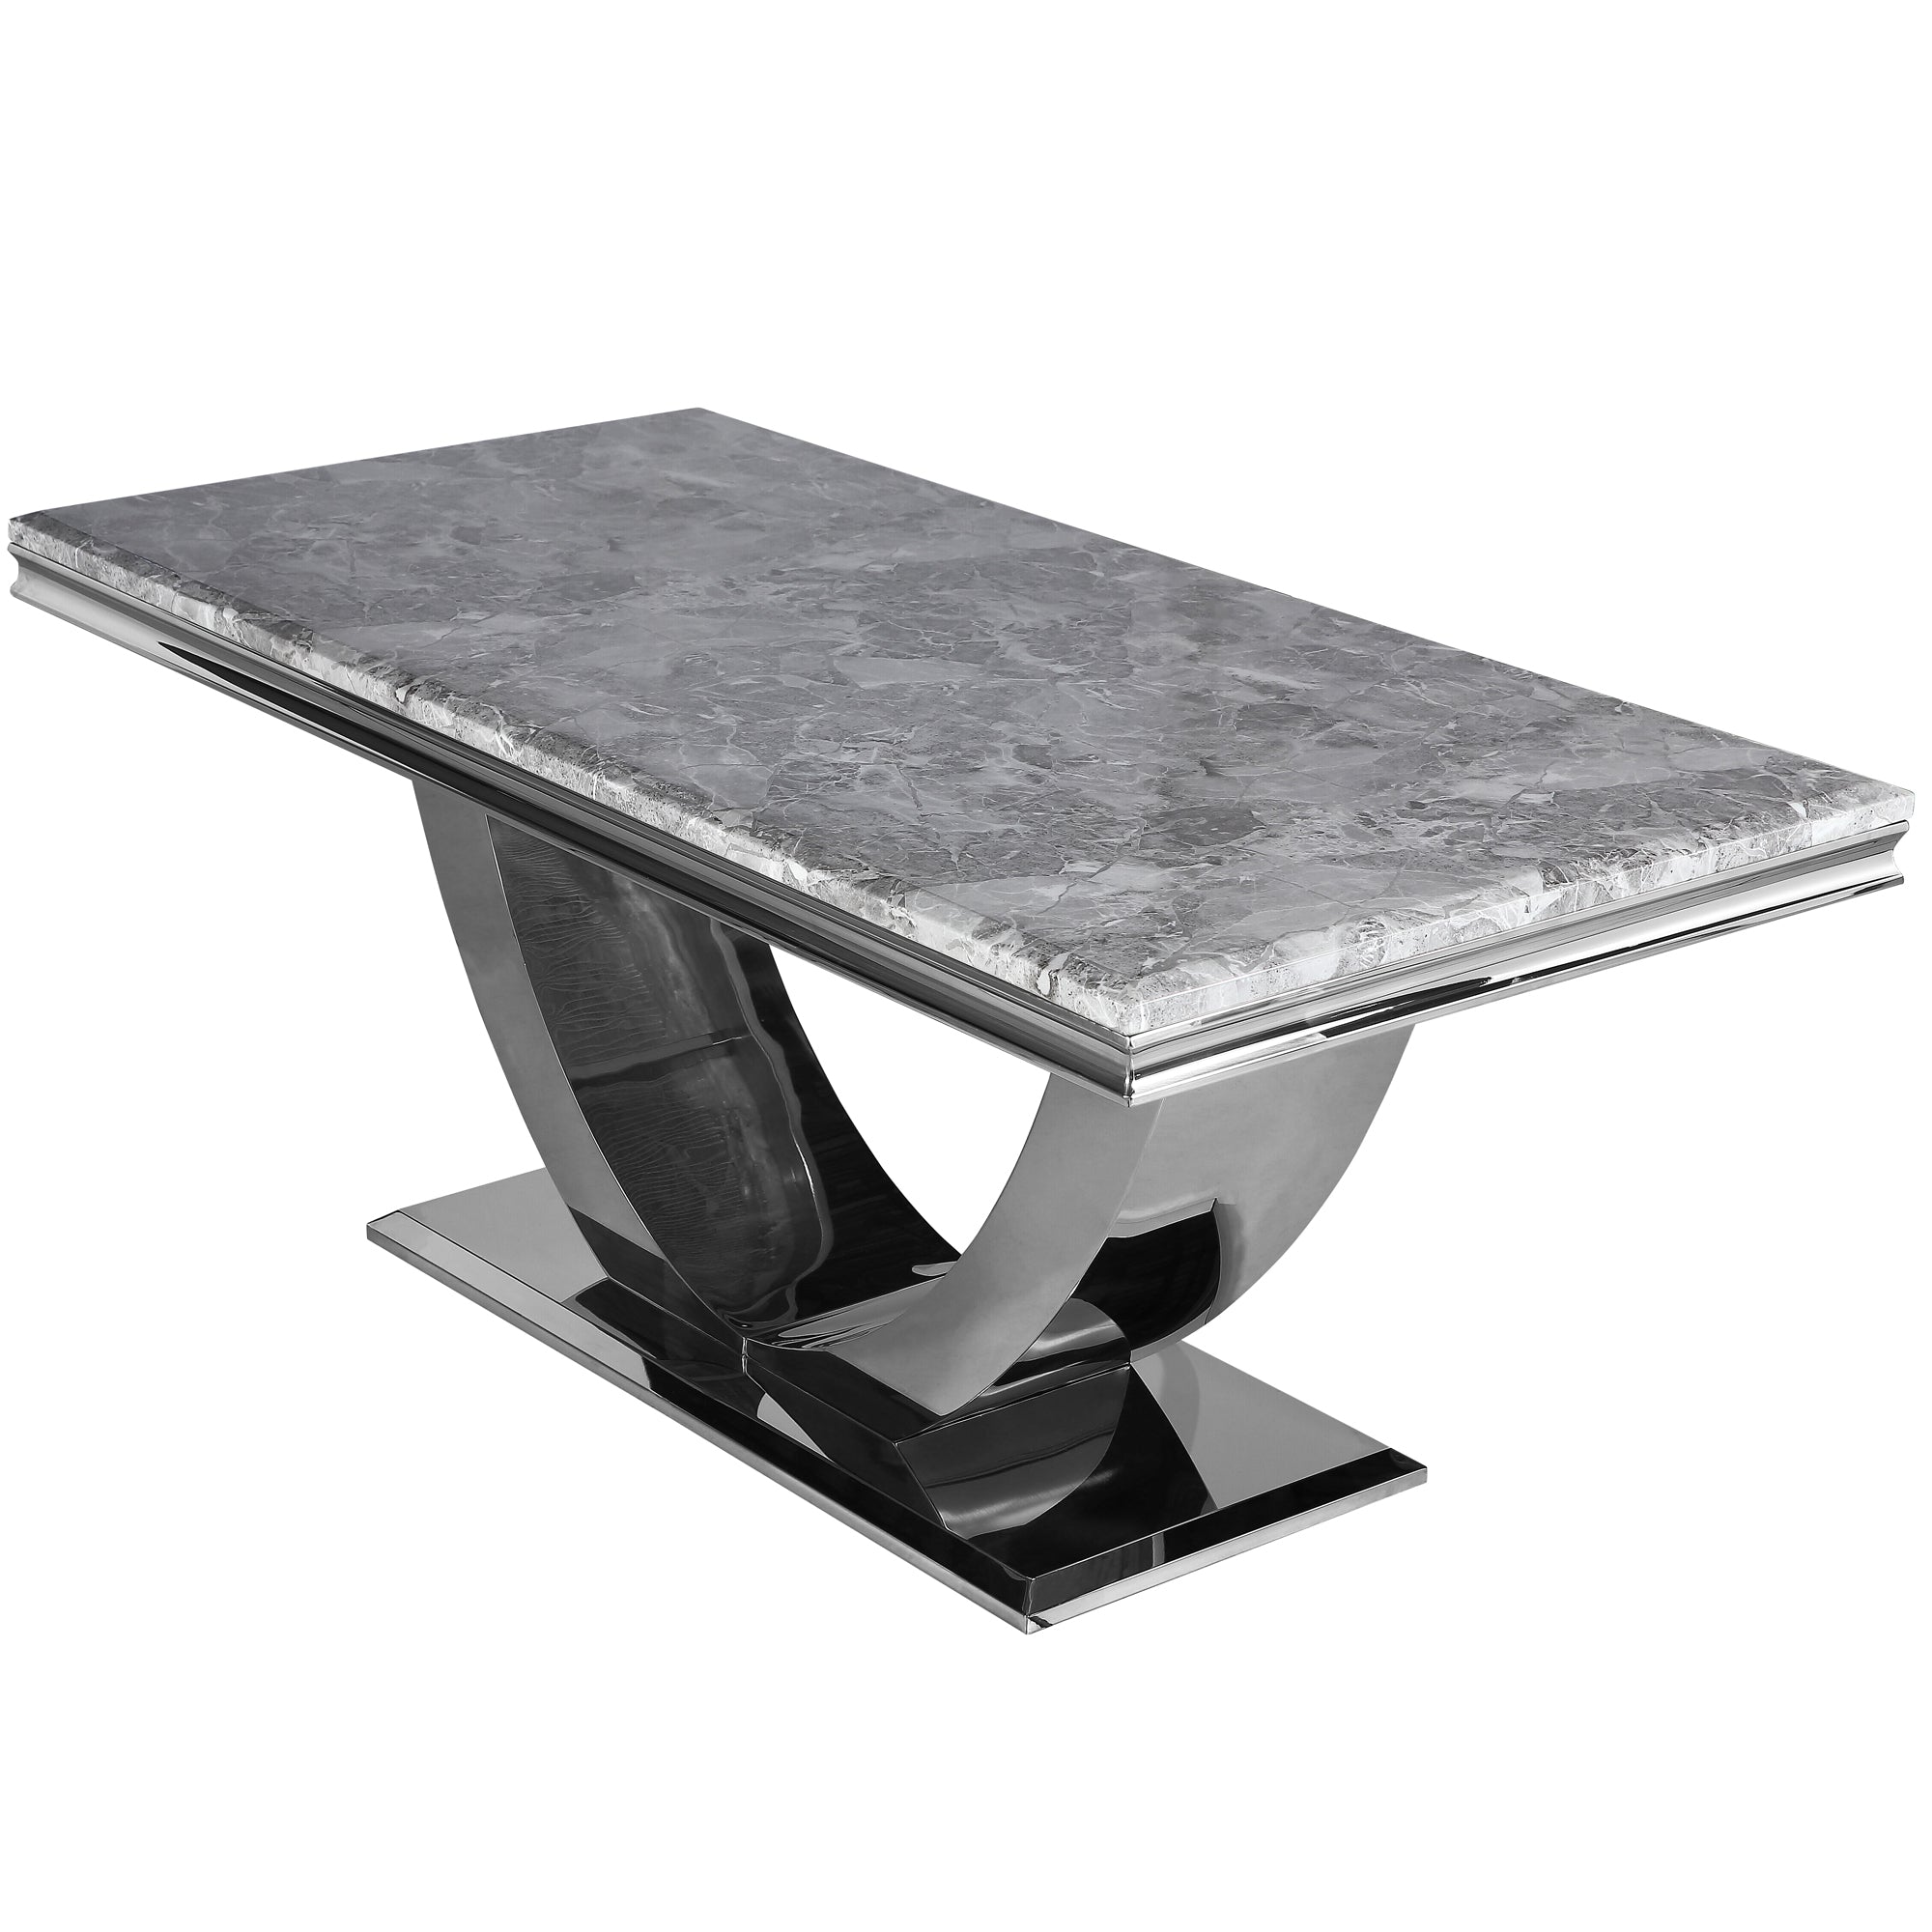 Arial Dining Table - ALL SIZES